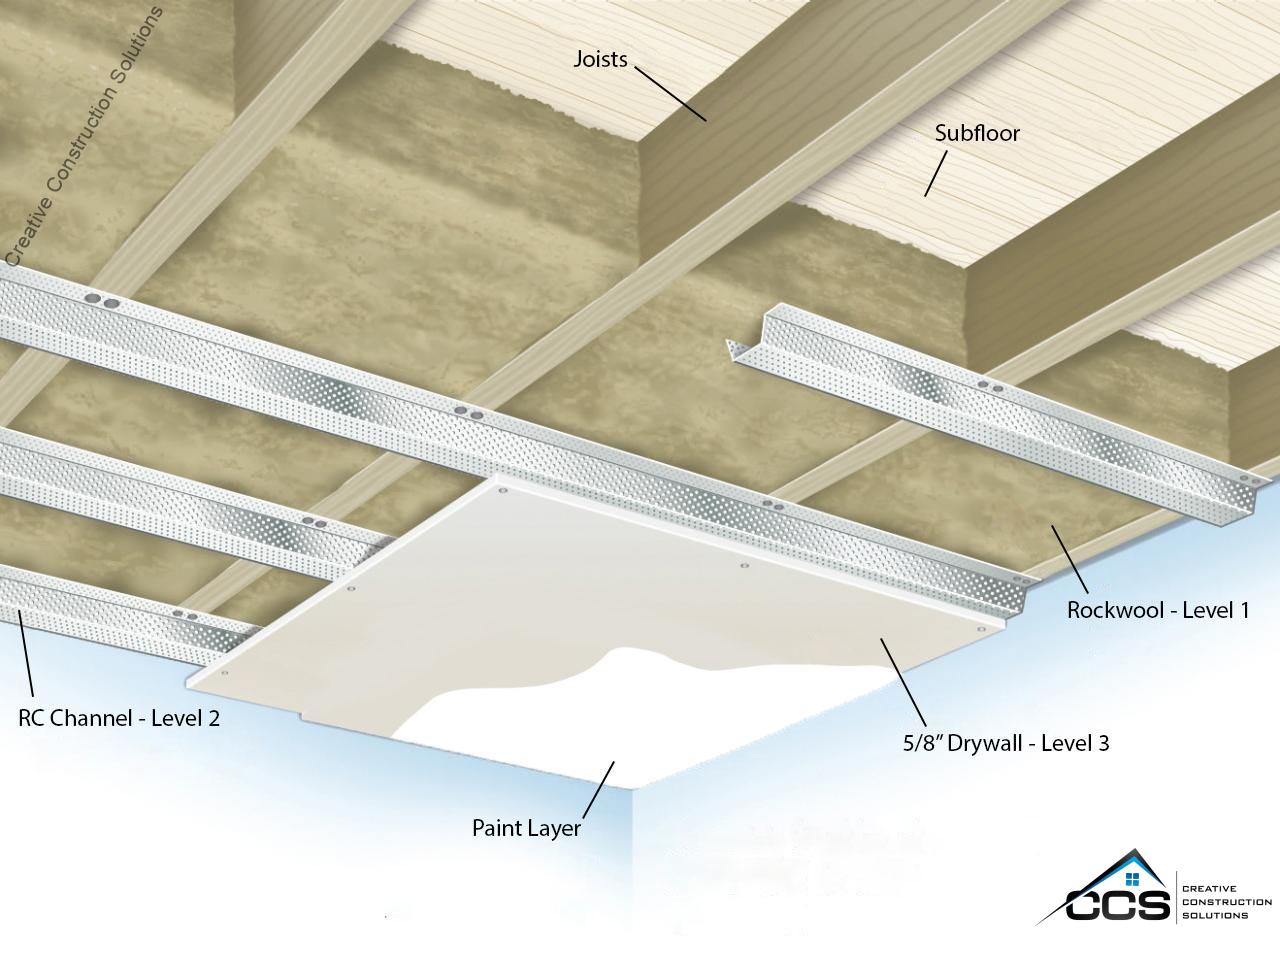 Is Sound Dampening Insulation Right for Basement Ceiling